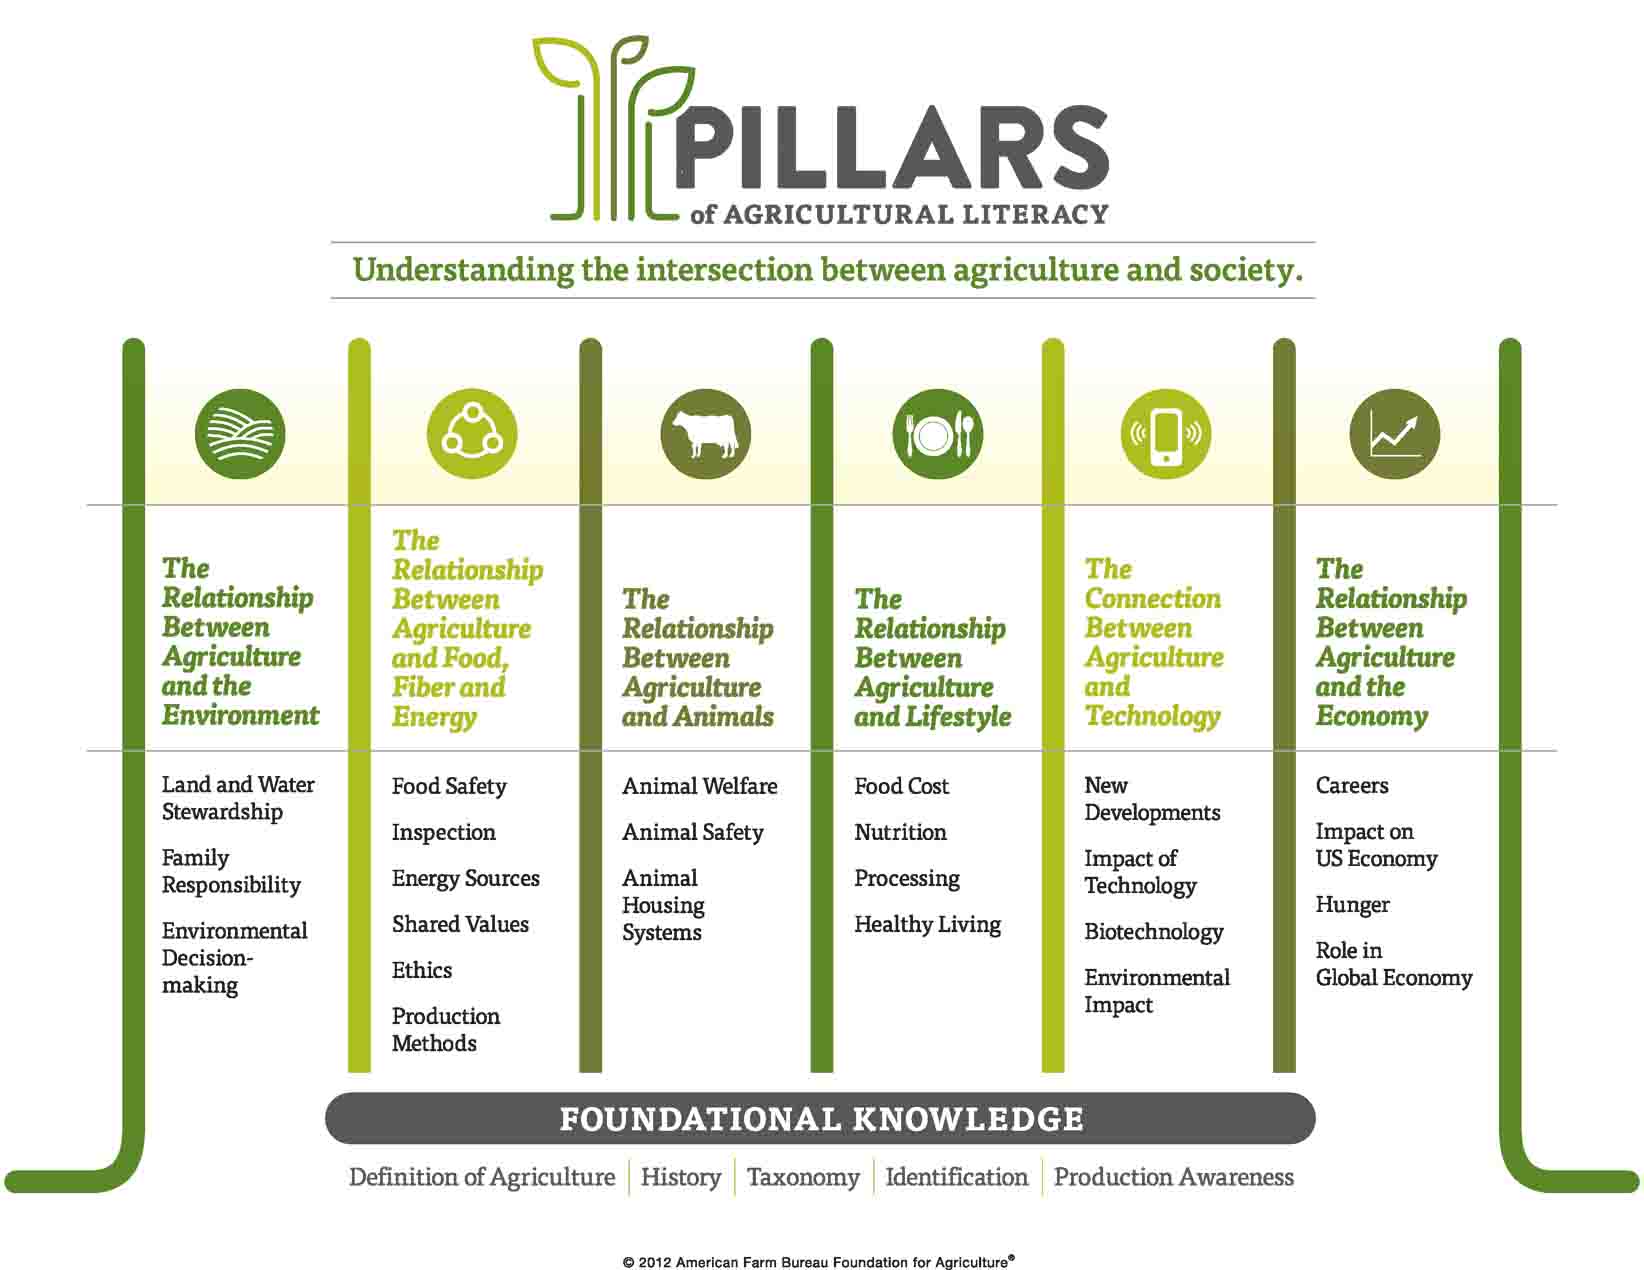 Pillars of agricultural literacy